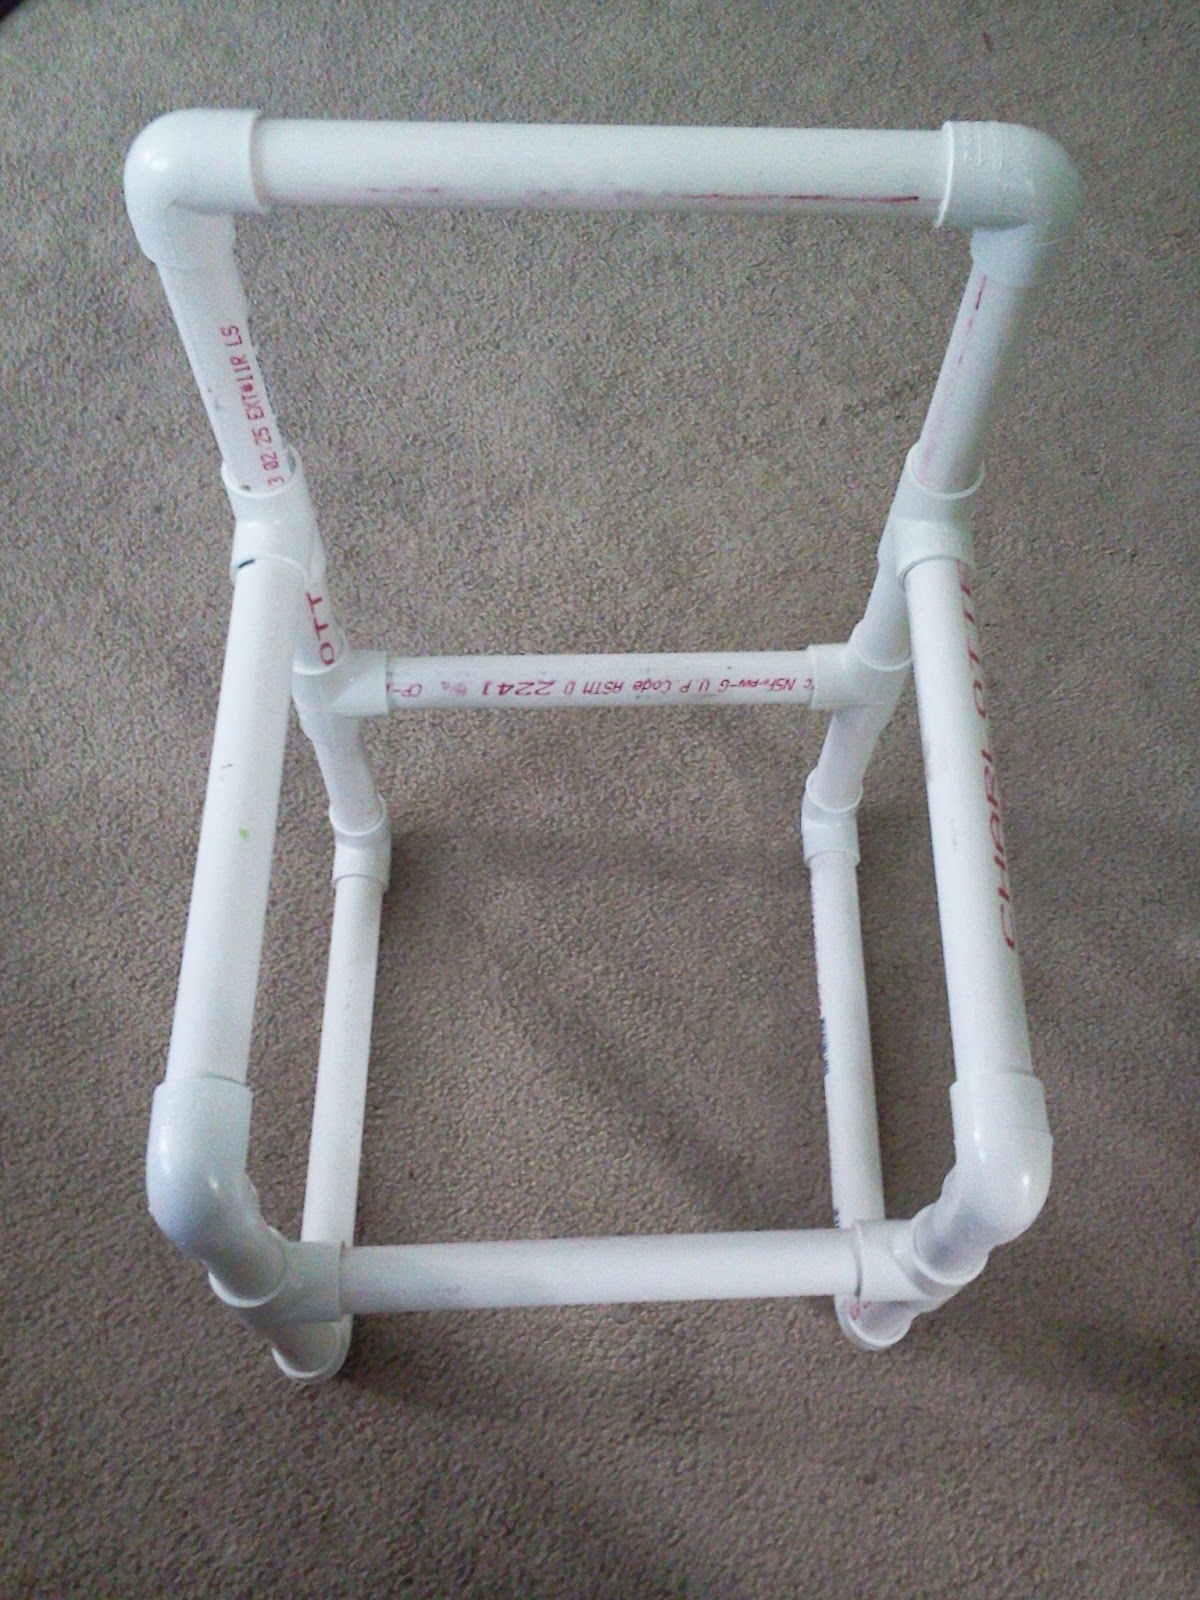 Woodwork How To Make A Chair Out Of Pvc Pipe PDF Plans